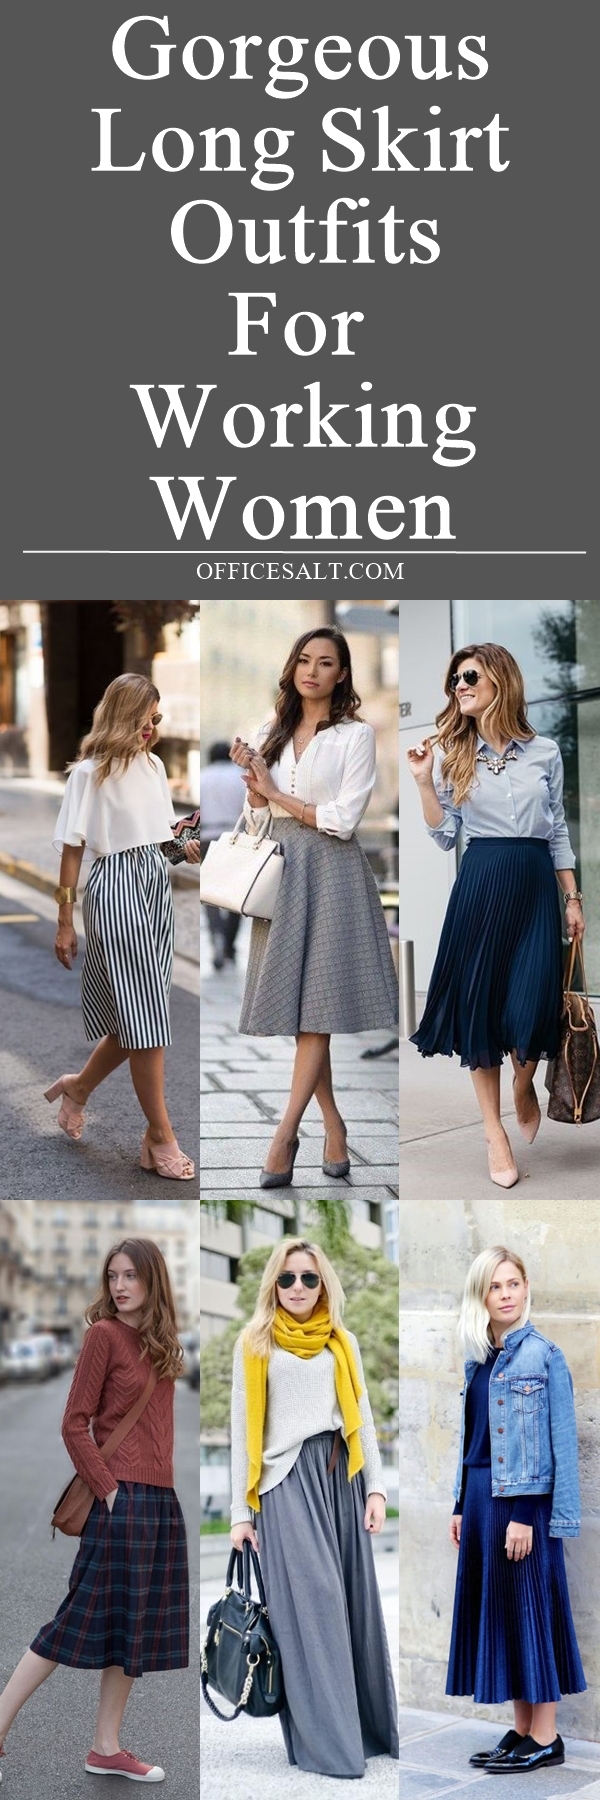 40 Gorgeous Long Skirt Outfits For Working Women – Office Salt